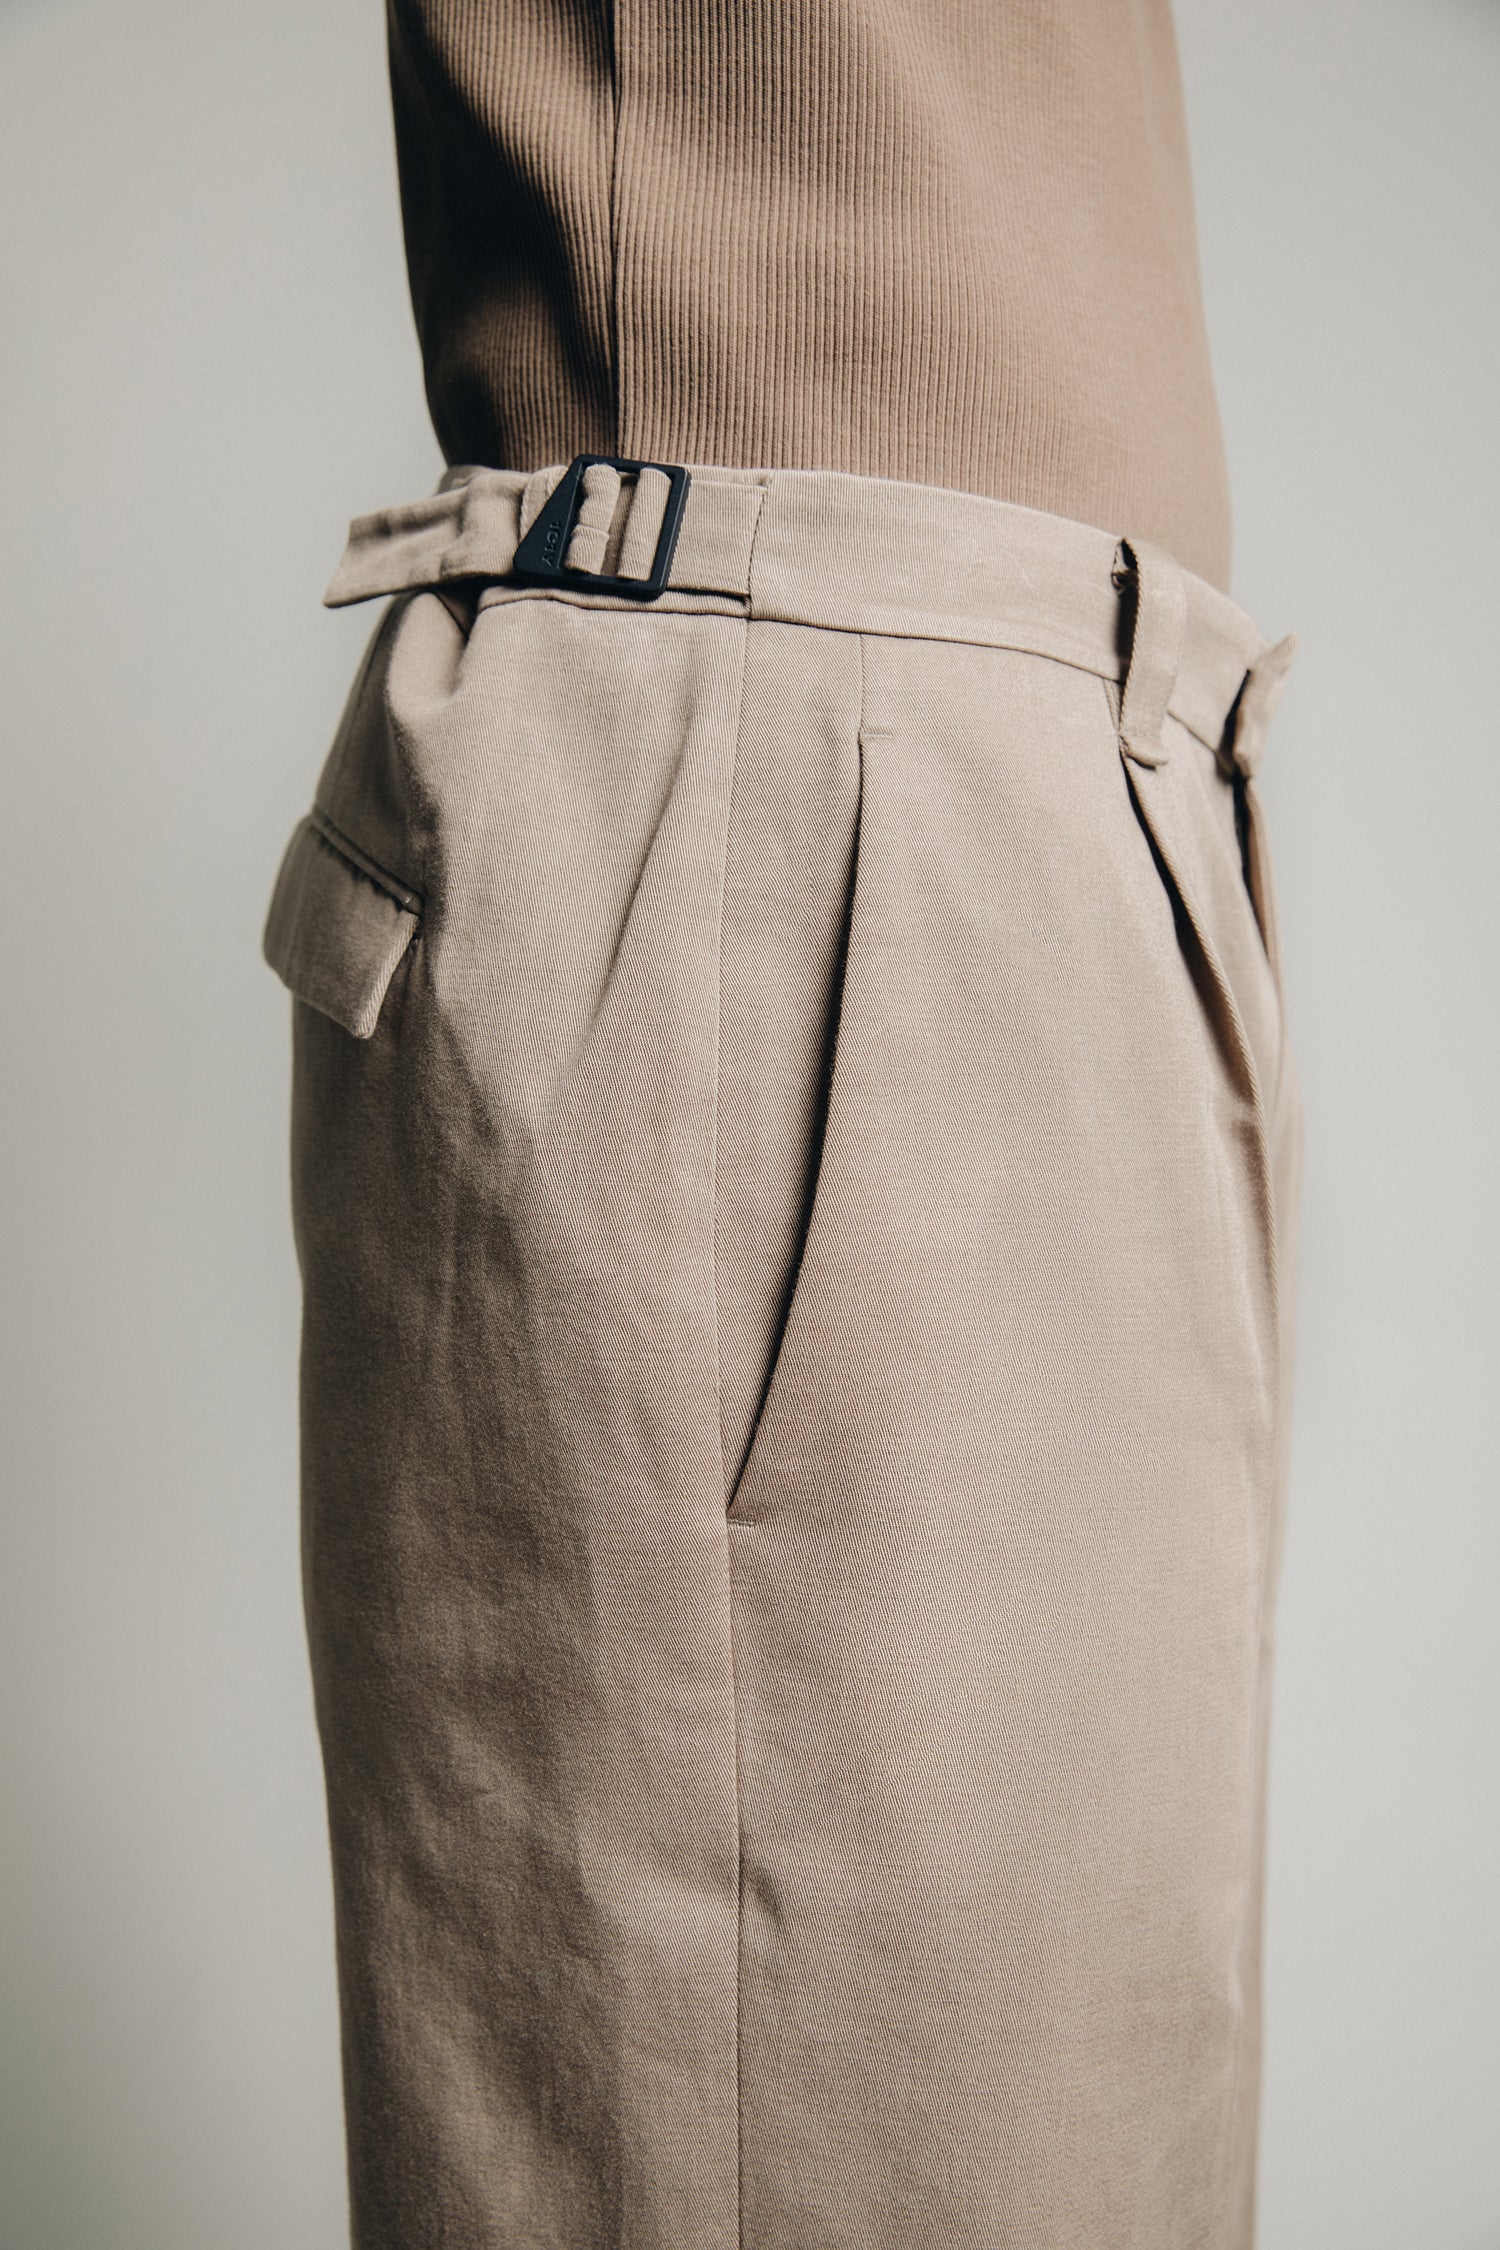 1c1y ss23 m1kyta straight suit pants in tobacco organic cotton side detail showing pleats back pockets and black side adjusters with new triangle detail